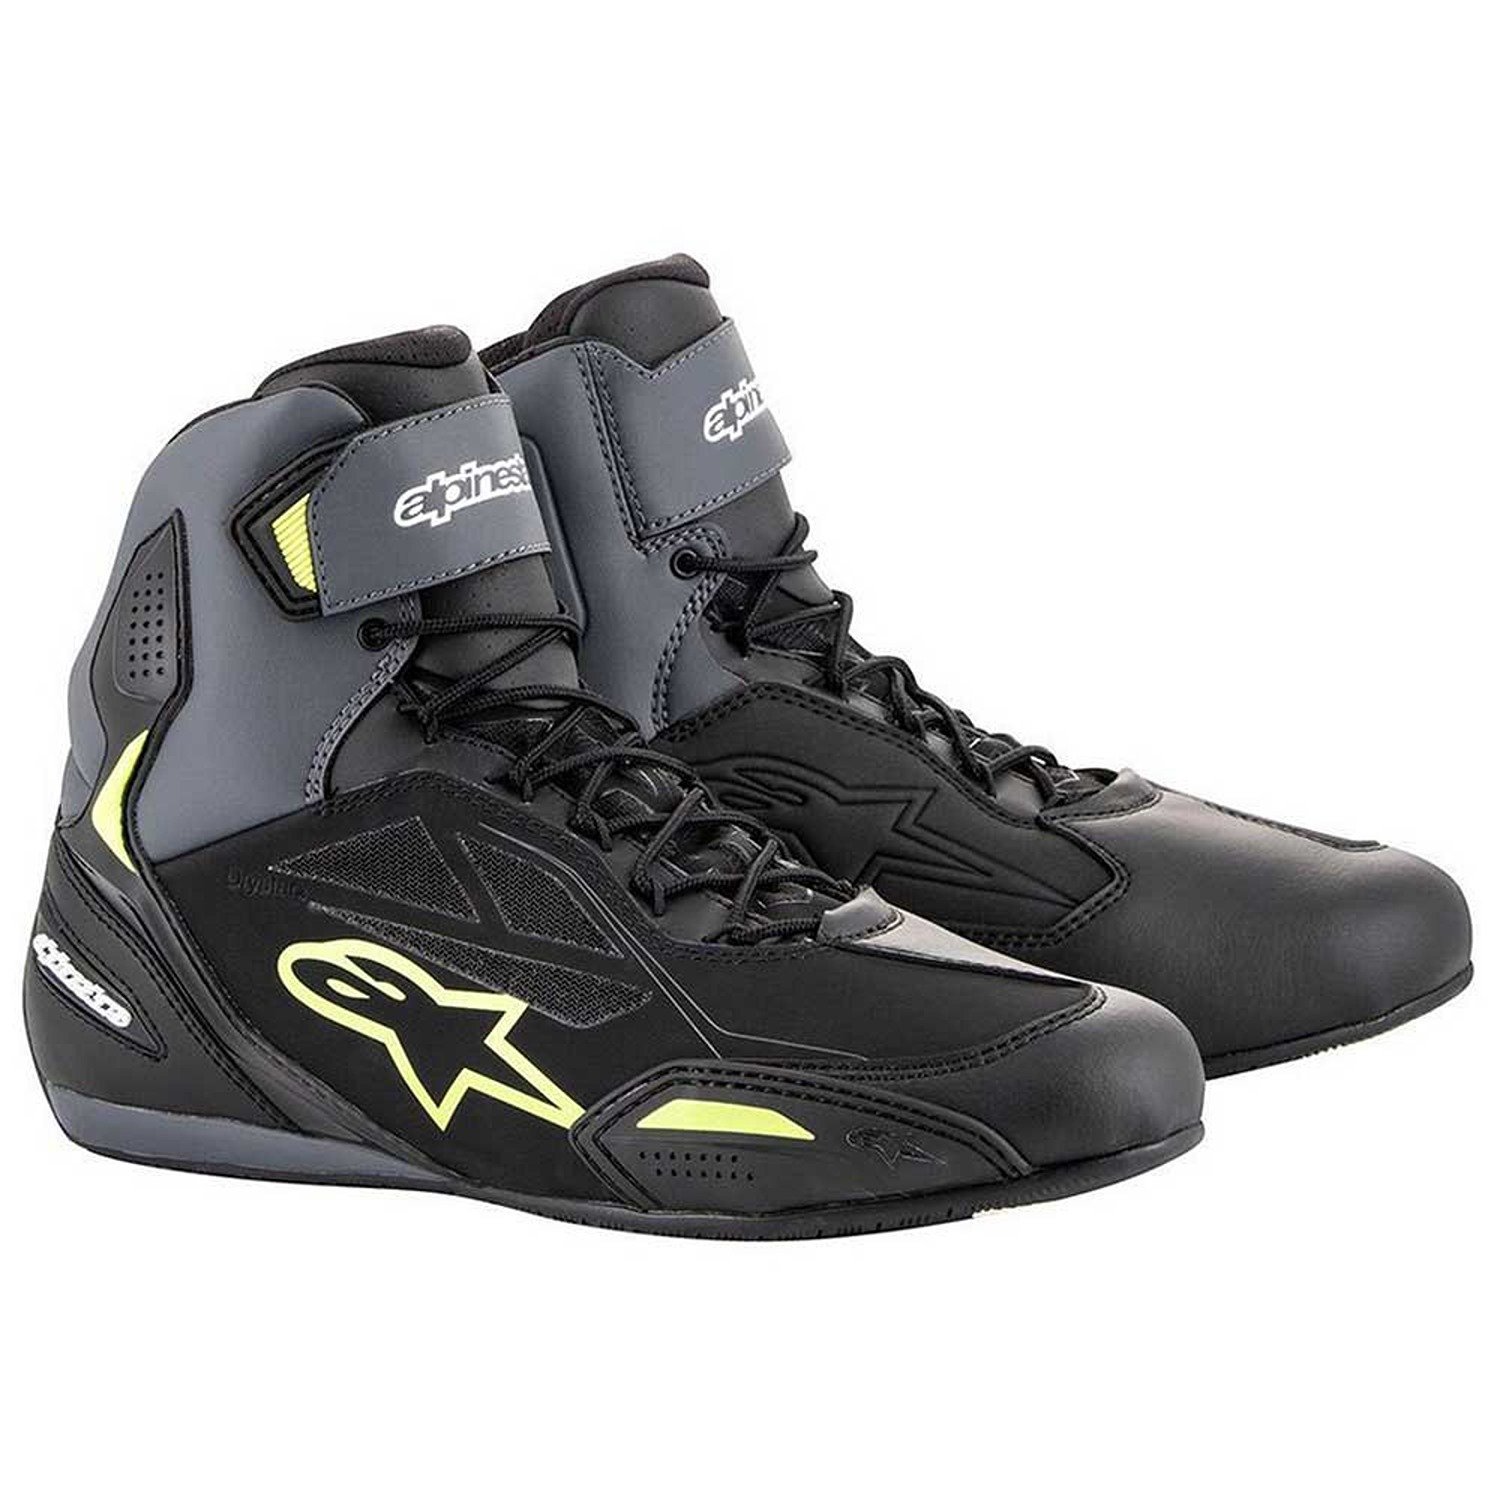 Image of Alpinestars Faster-3 Shoes Black Yellow Fluo Größe US 65